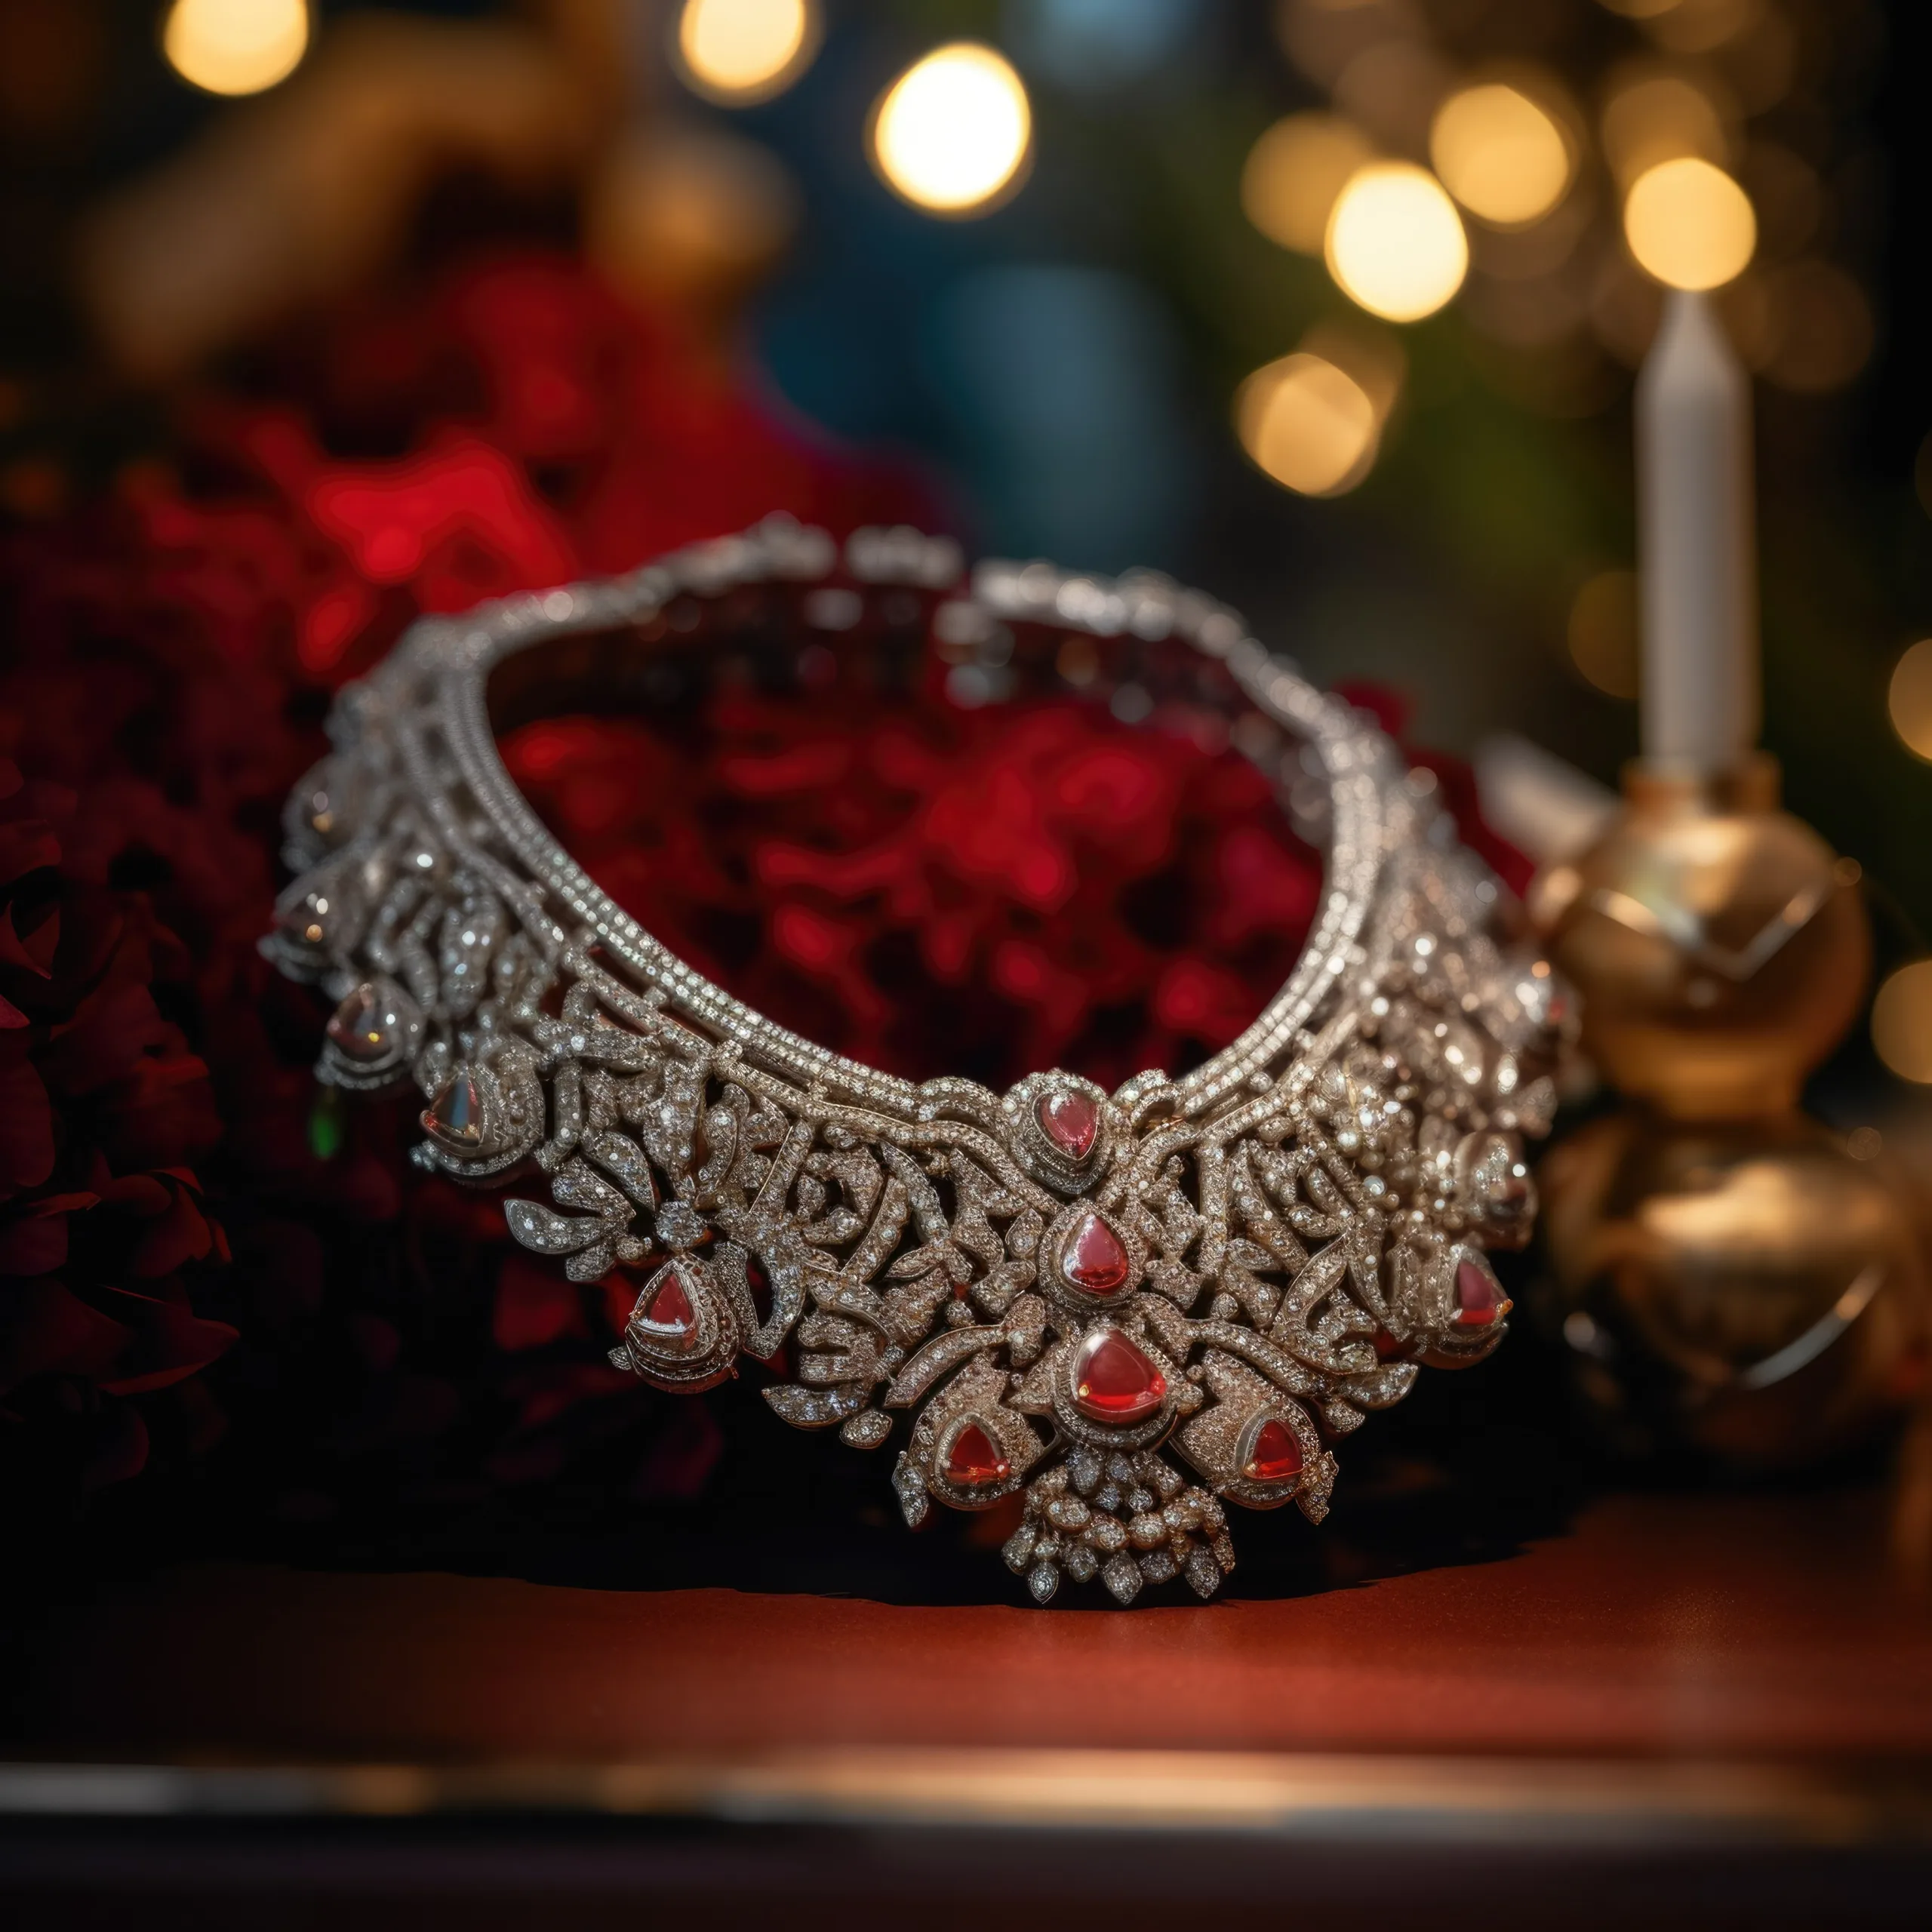 Photograph Wedding Jewellery: a close up of a bracelet and a candle.